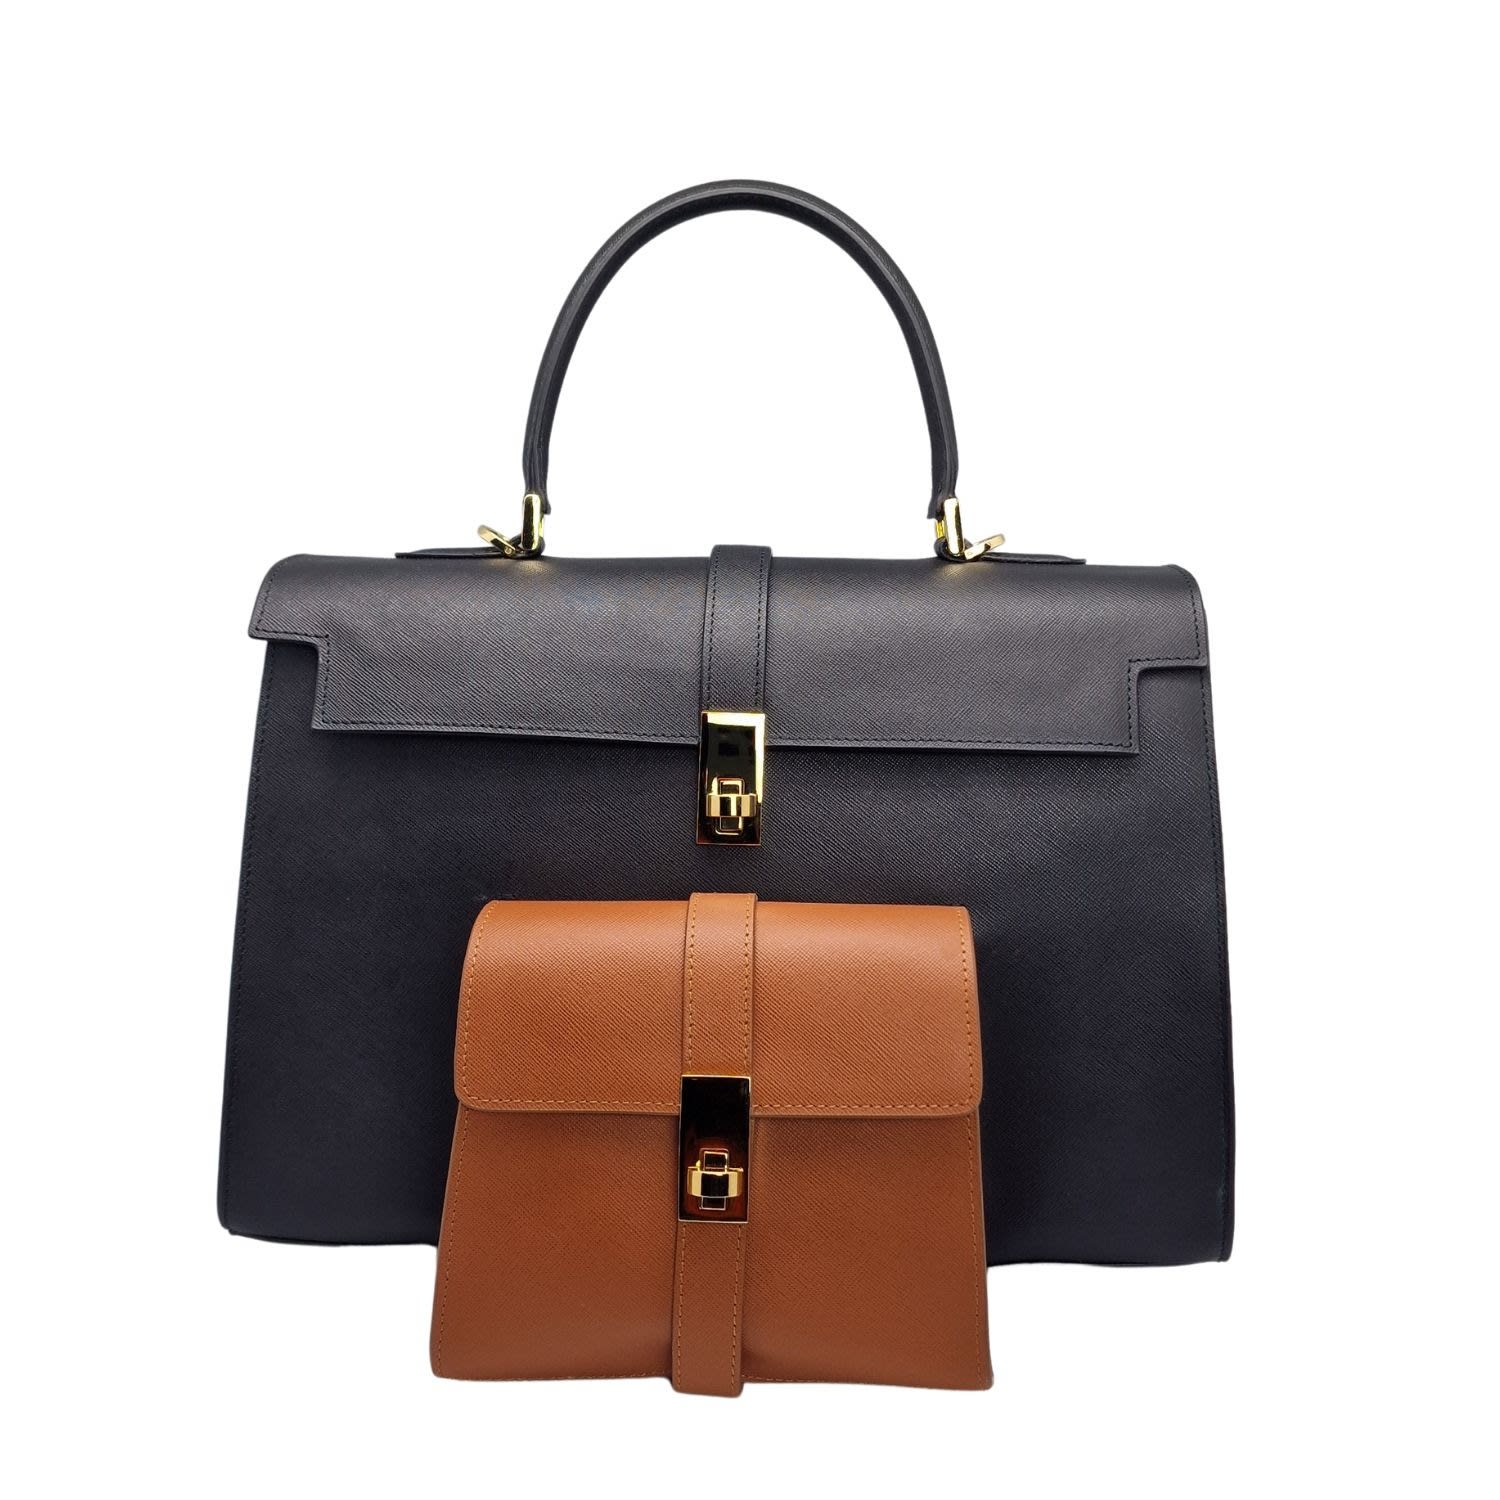 Women’s Ethereal Double Dose Bag In Saffiano Calf Leather - Black & Brown Tote London